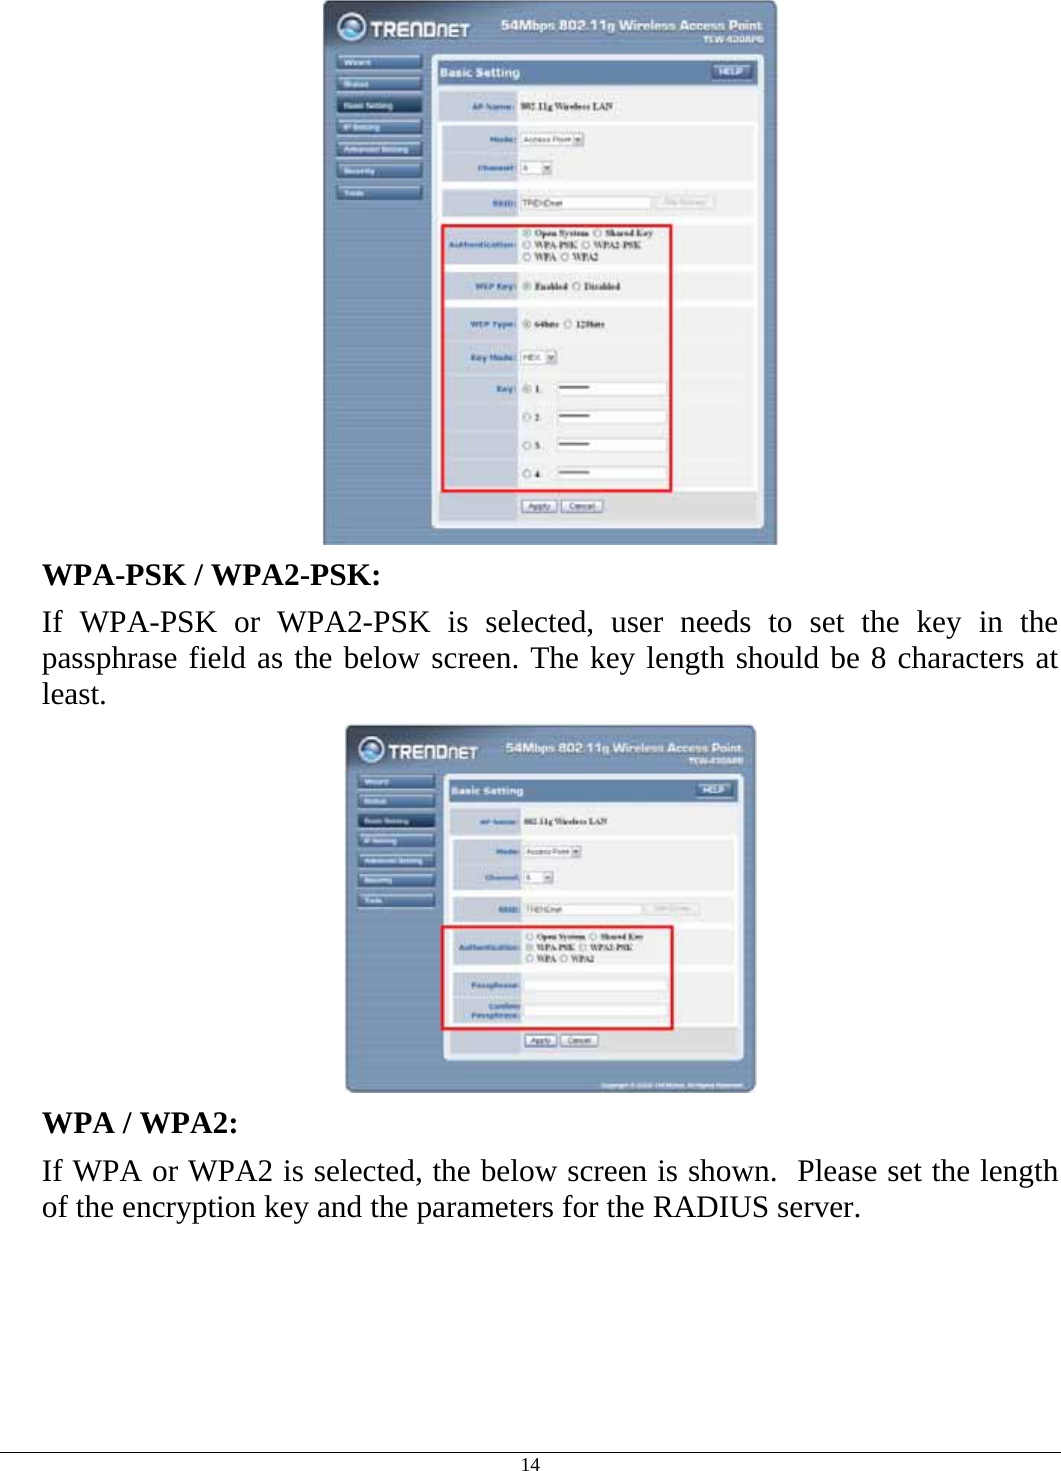  14  WPA-PSK / WPA2-PSK:    If WPA-PSK or WPA2-PSK is selected, user needs to set the key in the passphrase field as the below screen. The key length should be 8 characters at least.  WPA / WPA2:  If WPA or WPA2 is selected, the below screen is shown.  Please set the length of the encryption key and the parameters for the RADIUS server. 